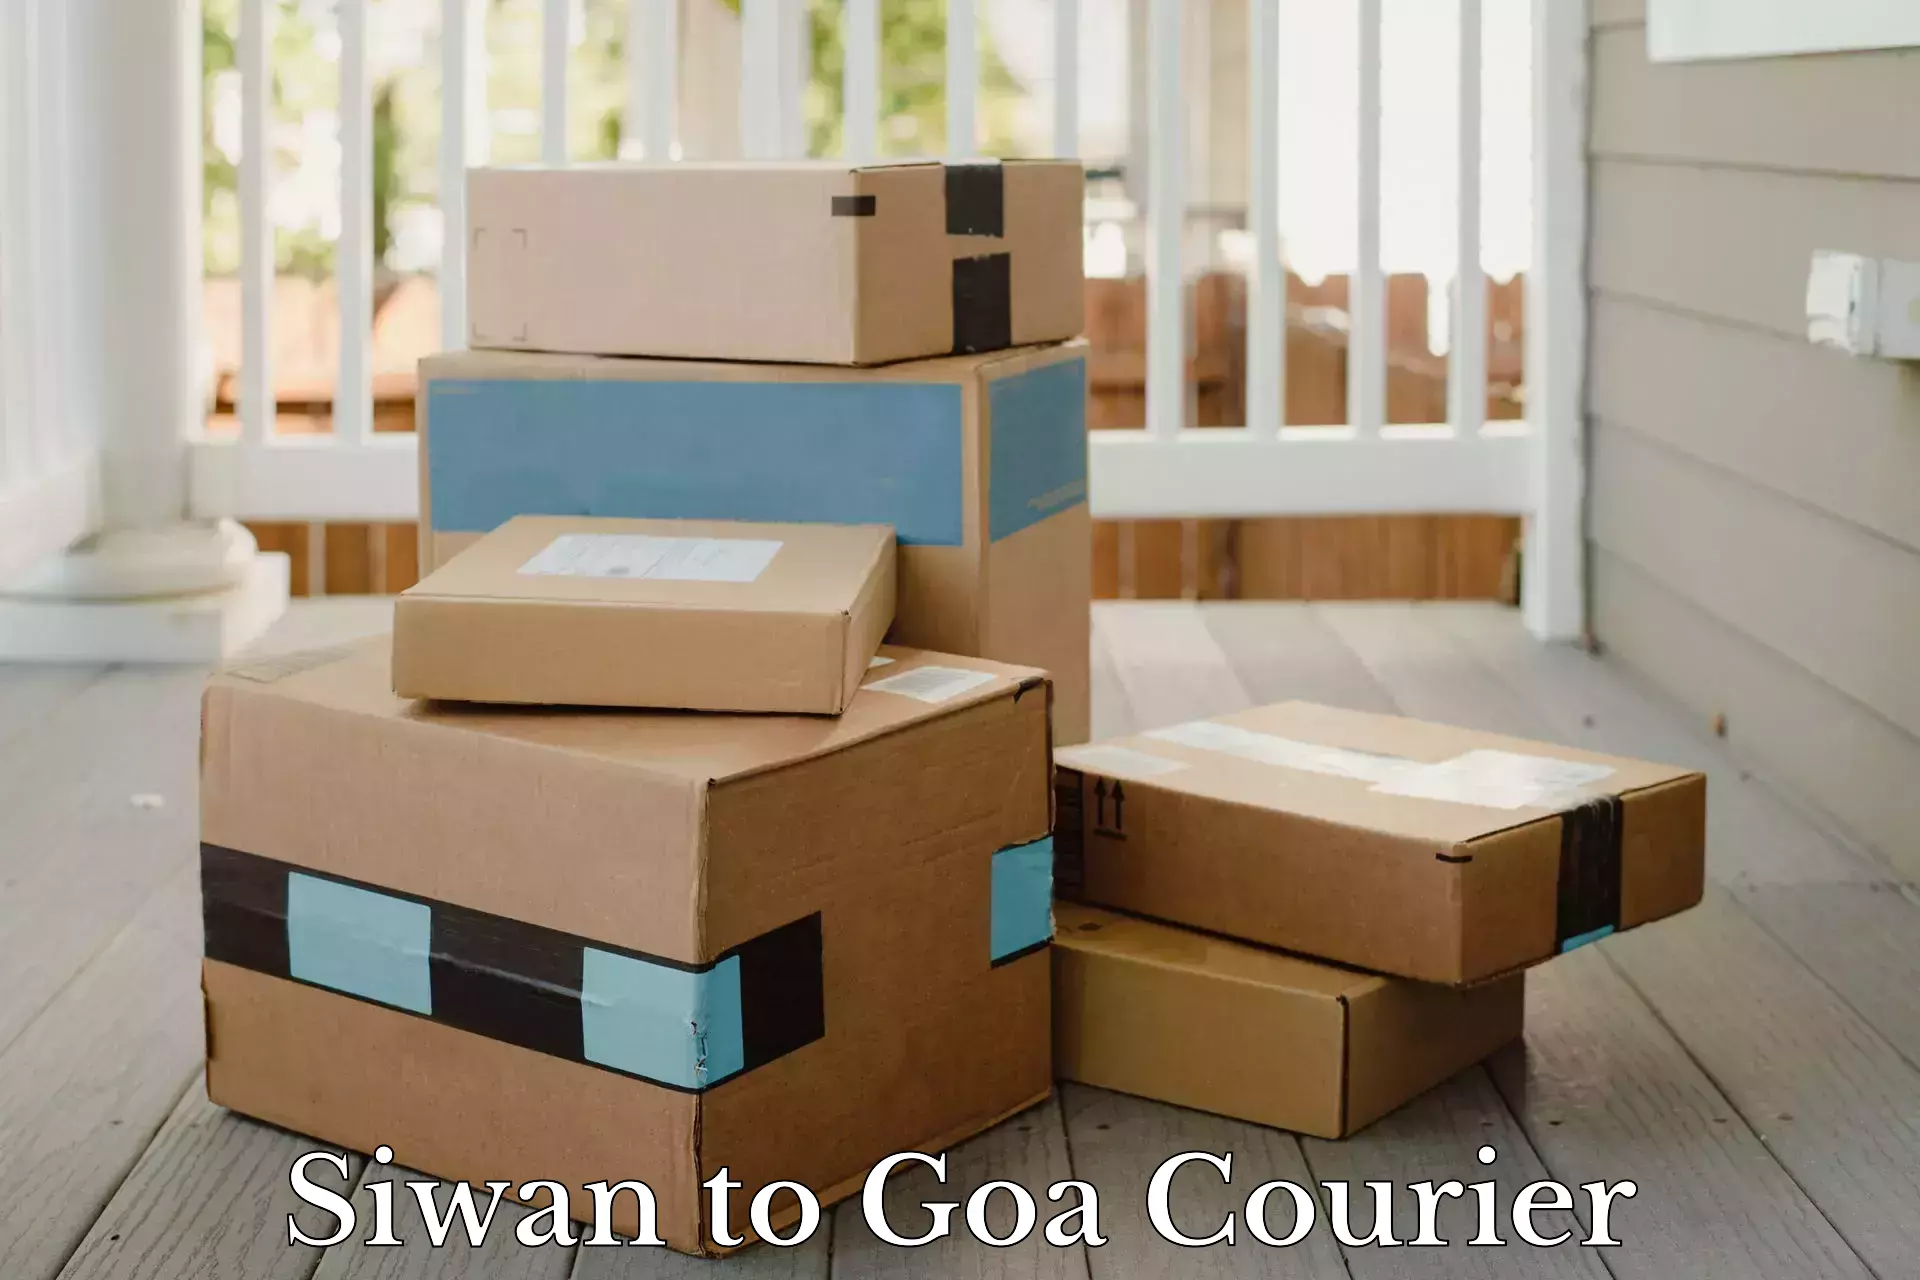 Supply chain efficiency Siwan to South Goa